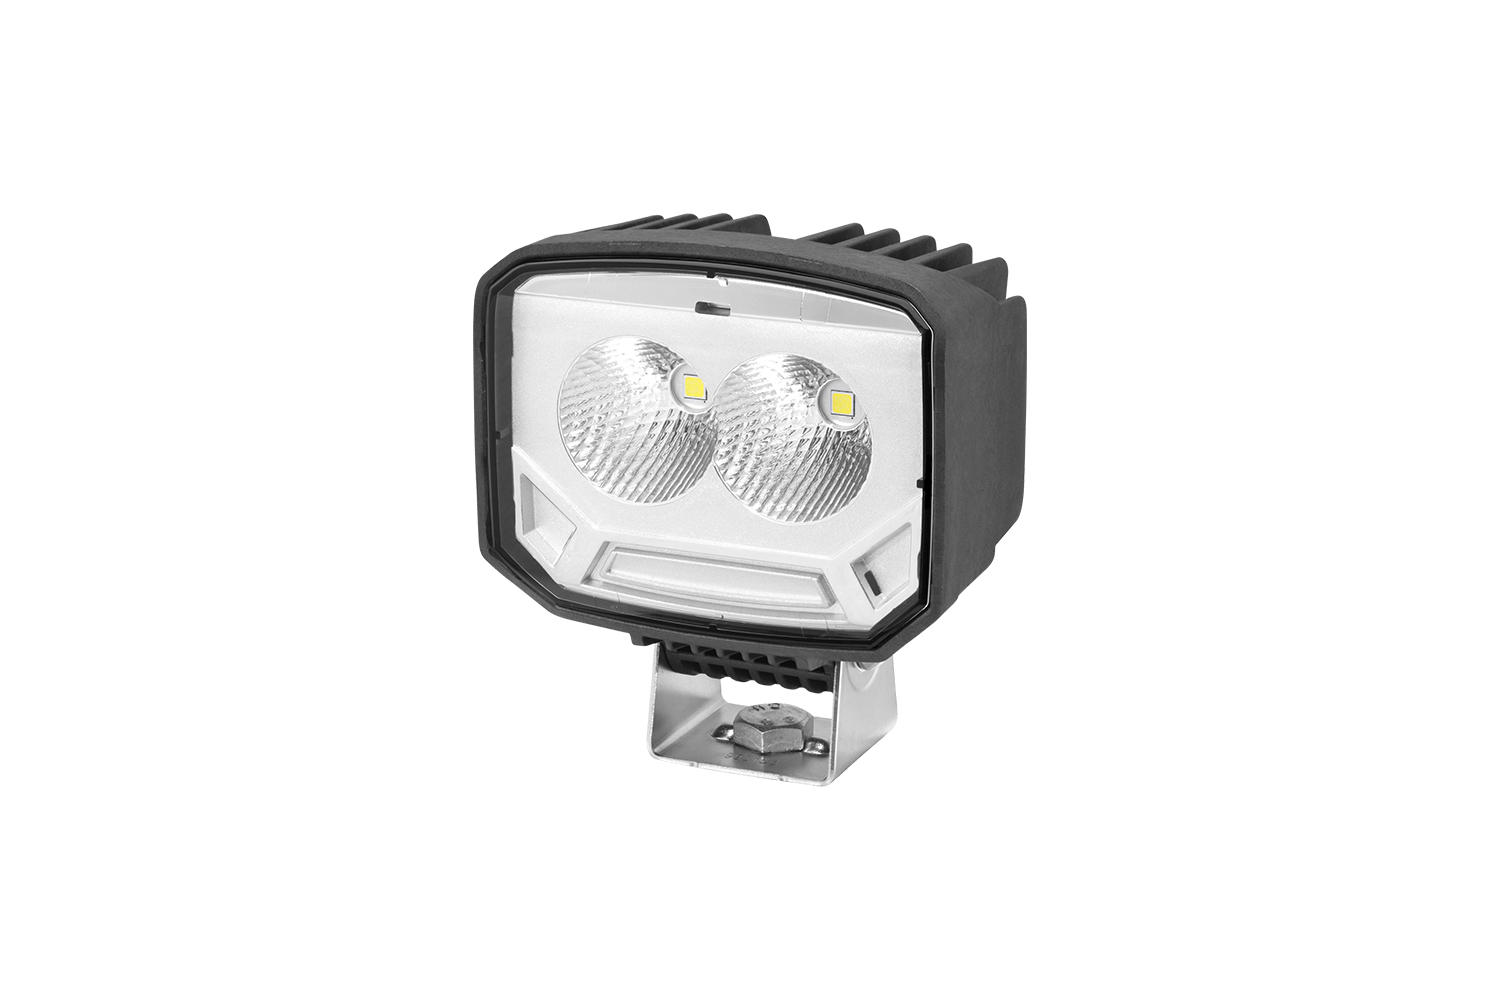 Power Beam S-series work lamps from Hella offered by Patlon